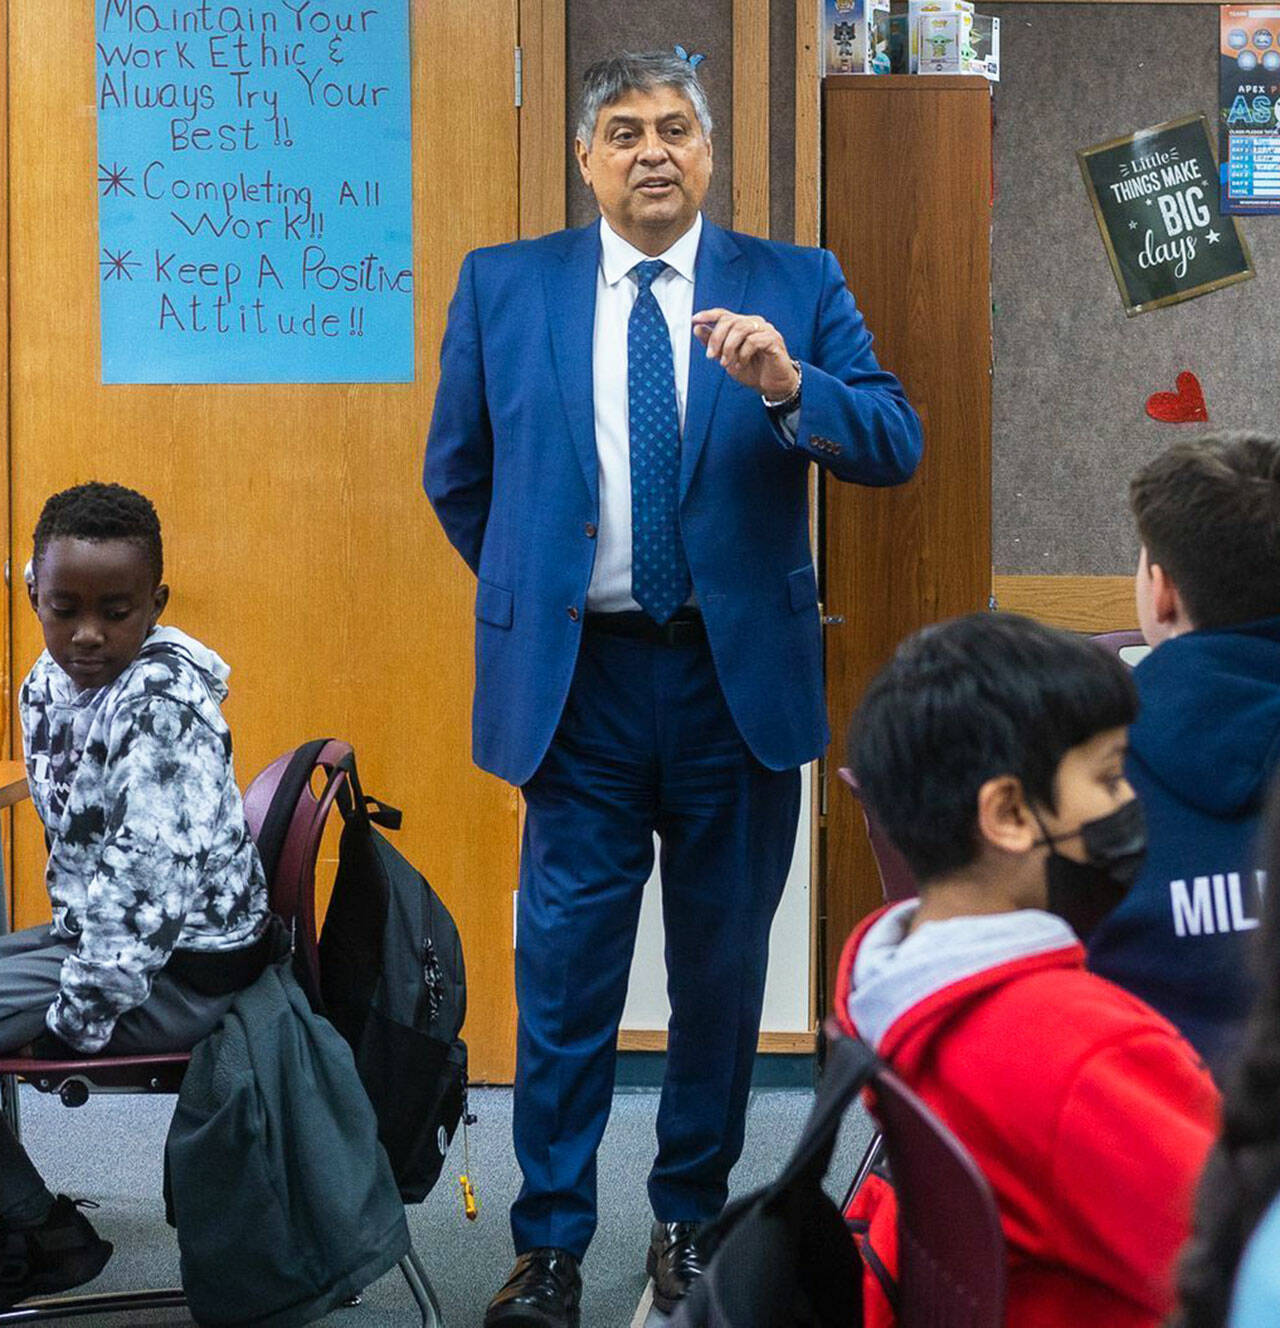 Israel Vela is the new superintendent of the Kent School District as the Kent School Board picked him over two other finalists. COURTESY PHOTO, Kent School District